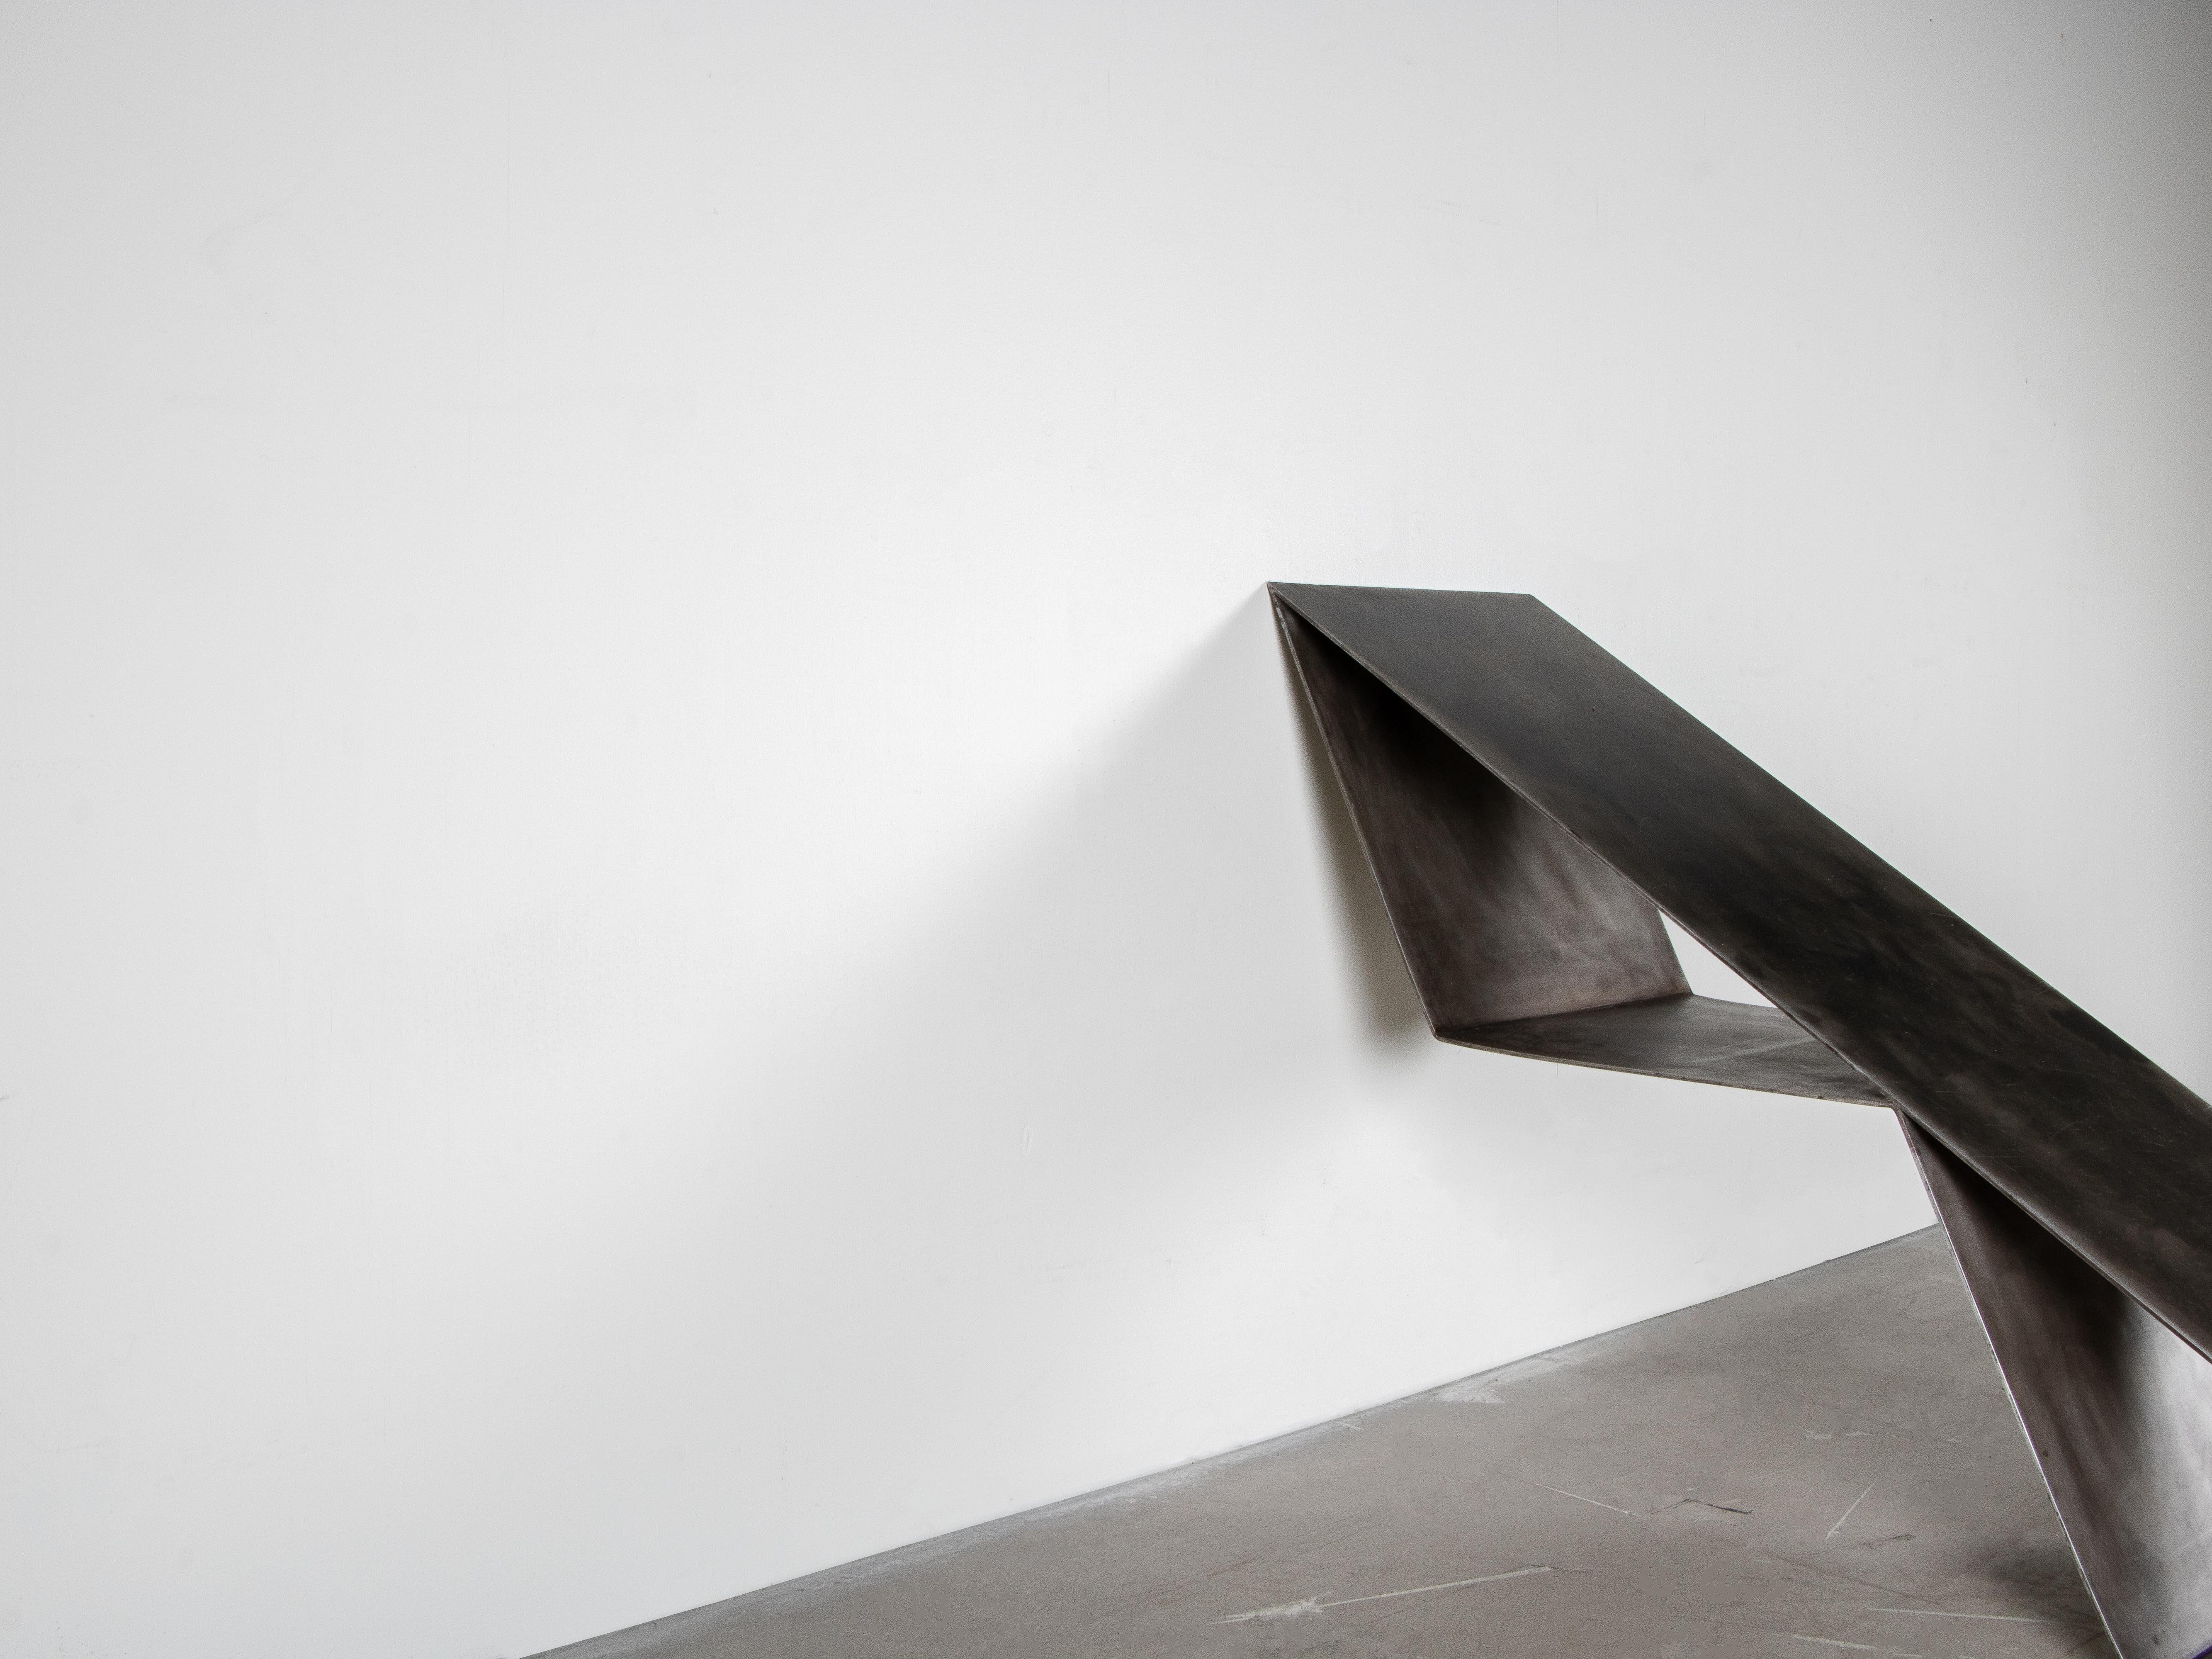 Anodized Contemporary Coffee / Sofa Table in Aluminium, Udd Table by Lucas Morten